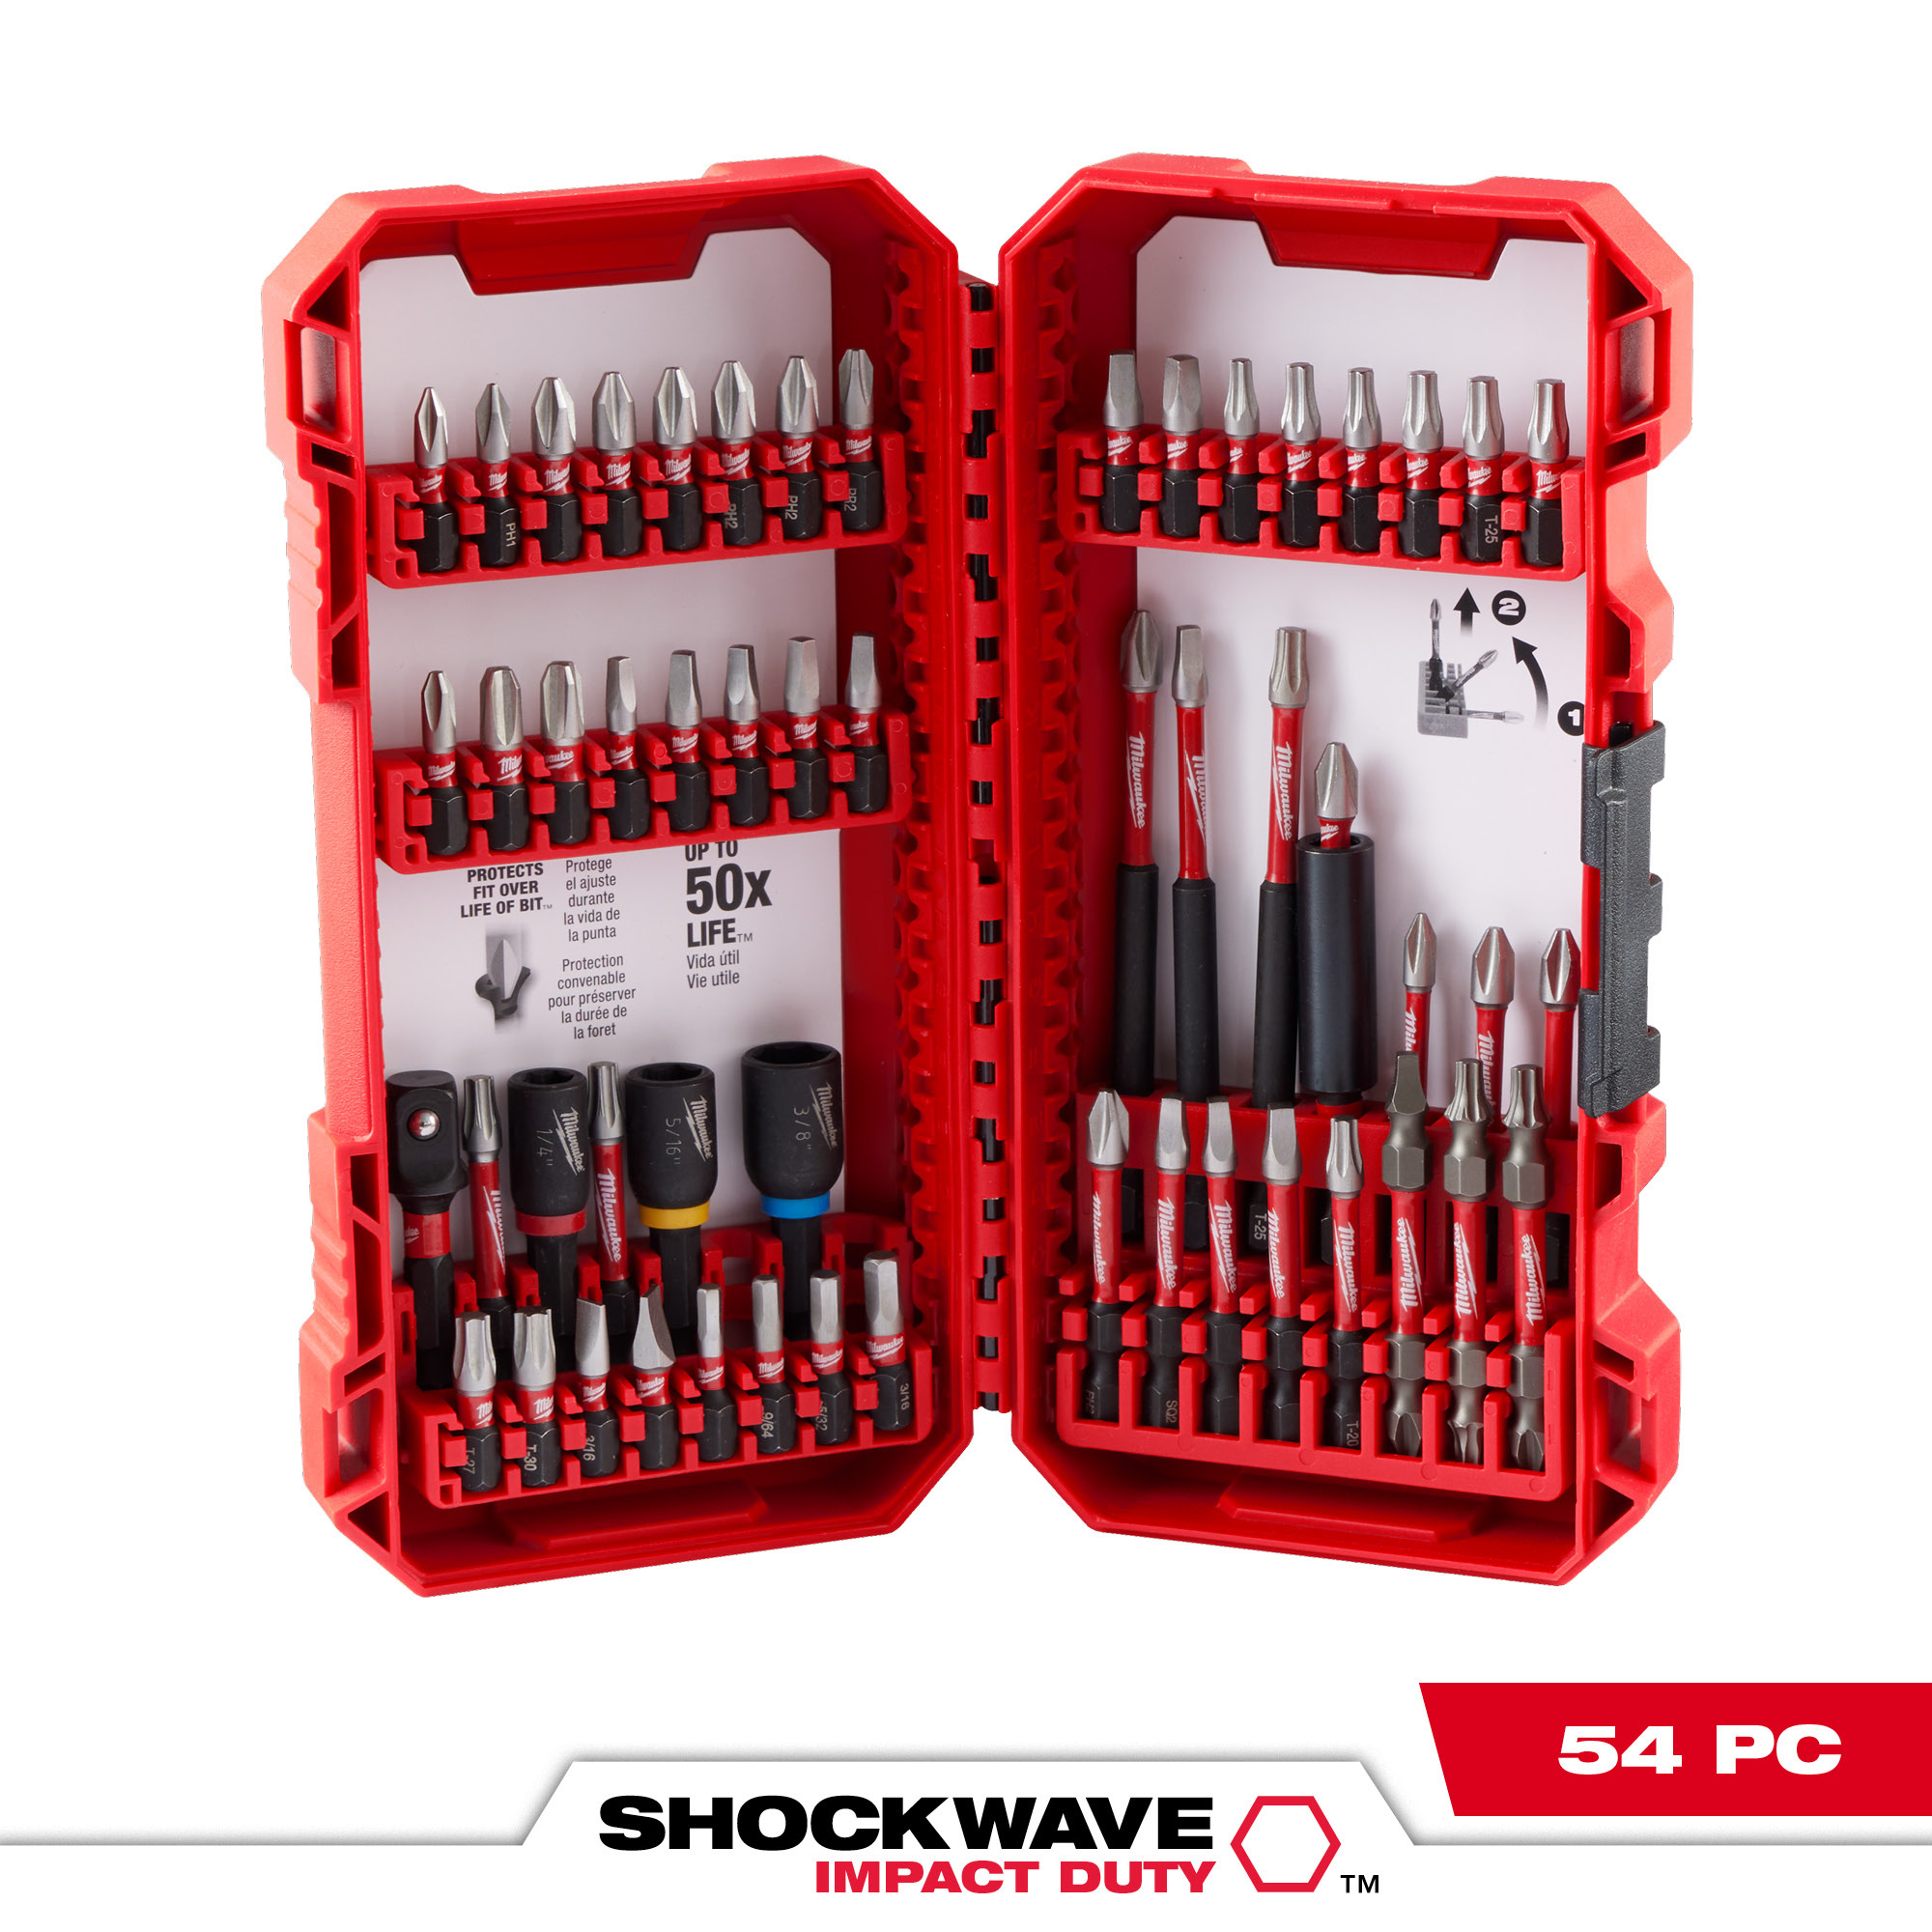 Milwaukee, SHOCKWAVE Impact Duty Driver Bit Set - 54PC, Included (qty.) 54 Model 48-32-4010